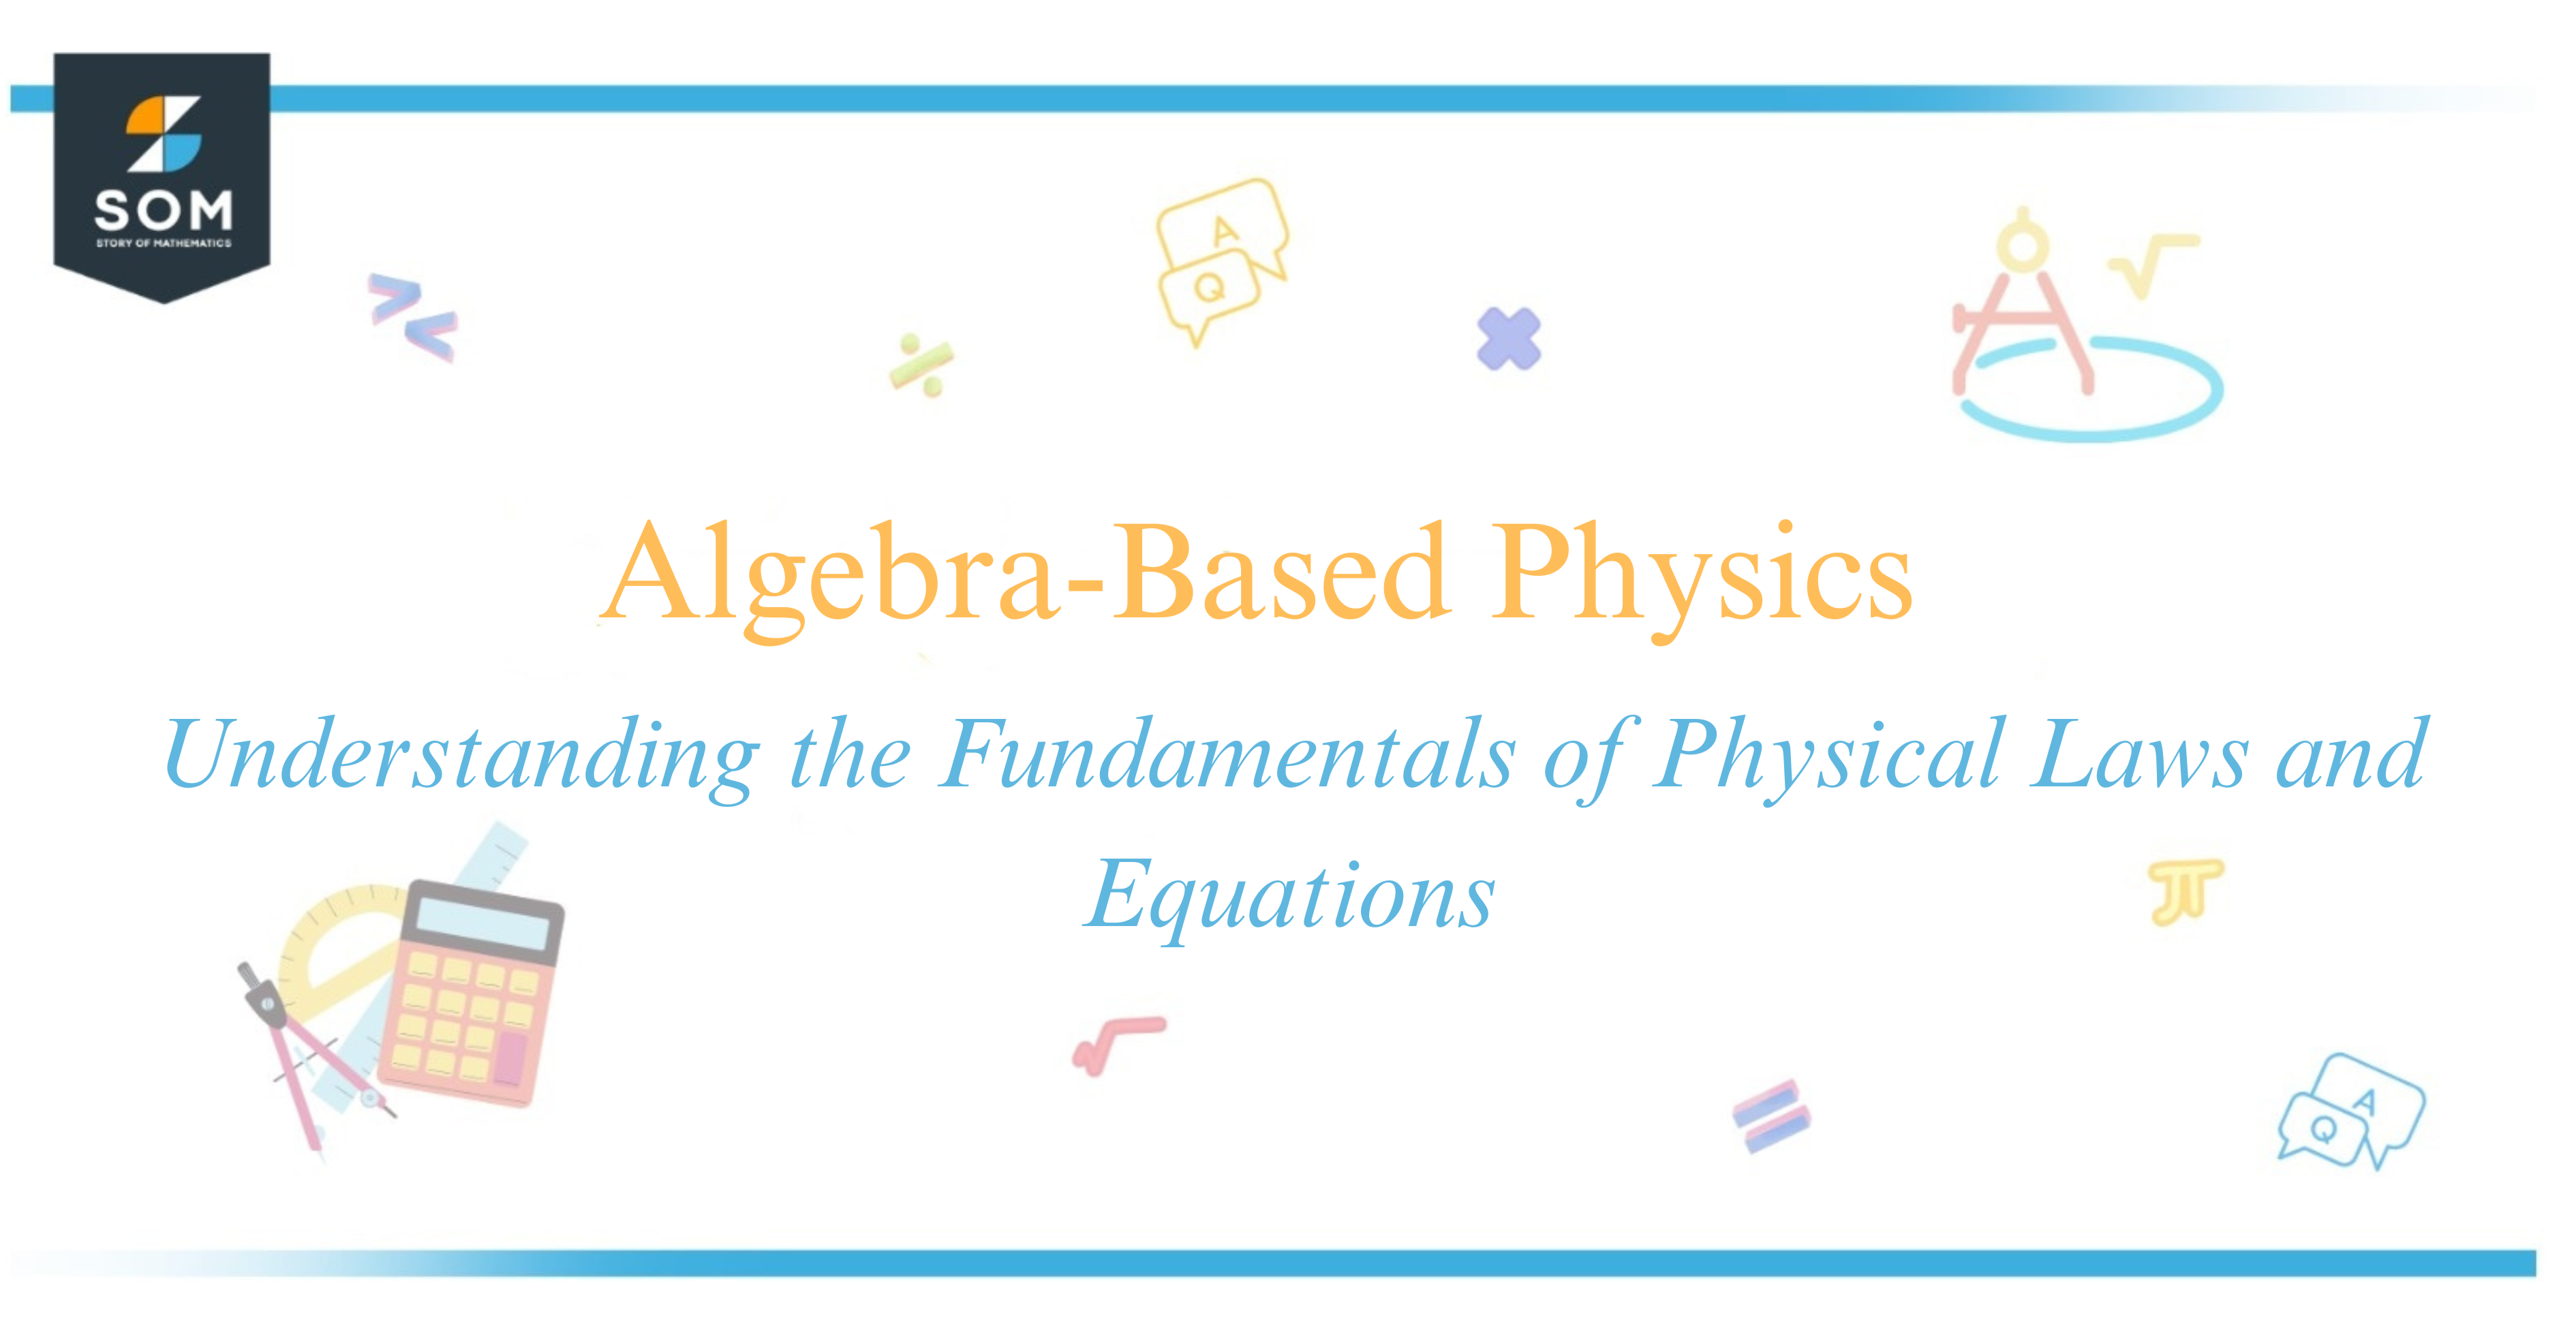 Algebra-Based Physics Understanding the Fundamentals of Physical Laws and Equations